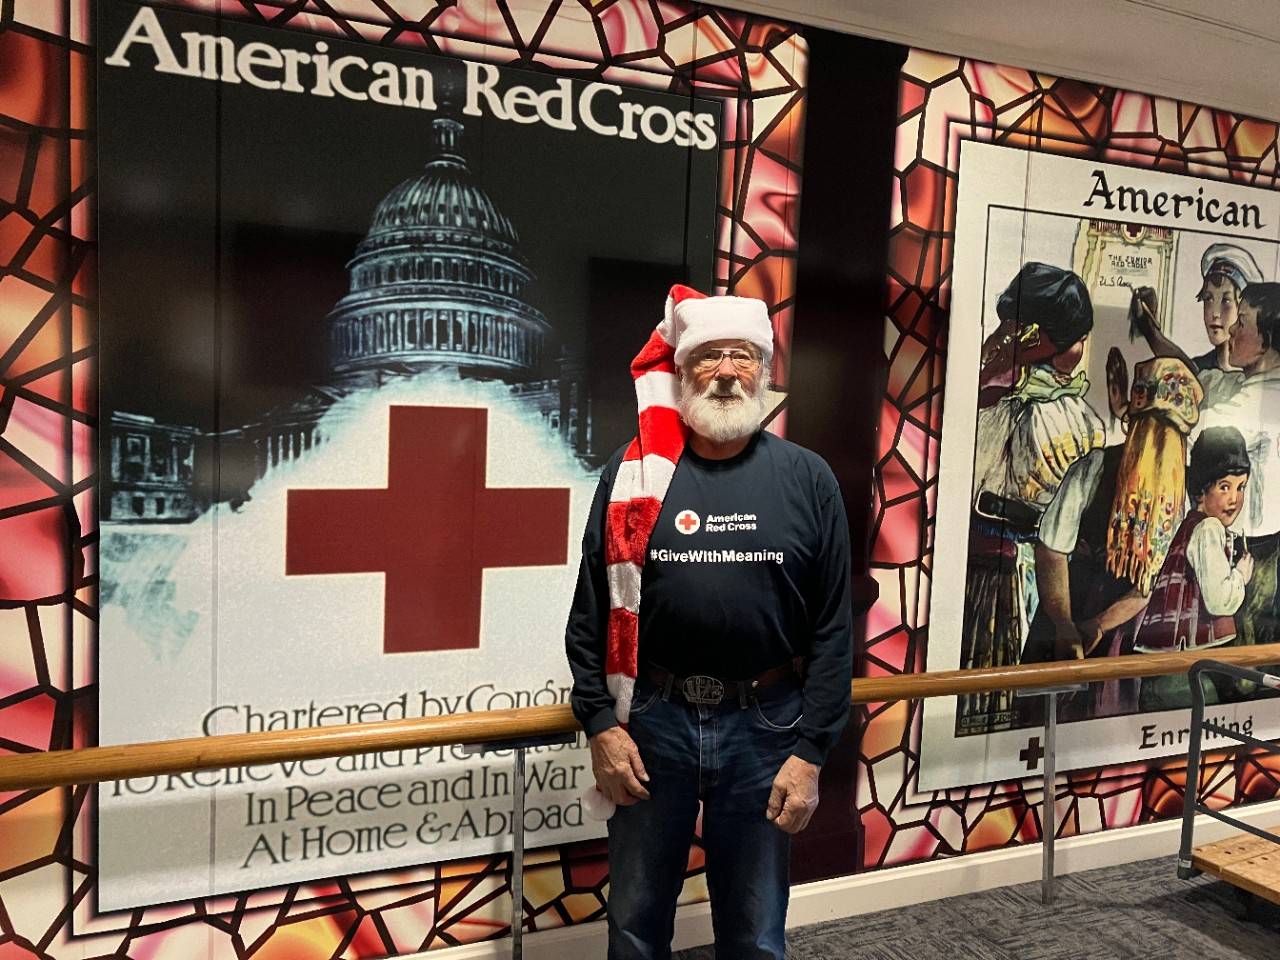 Dave Barman is standing in front of several historic American Red Cross posters